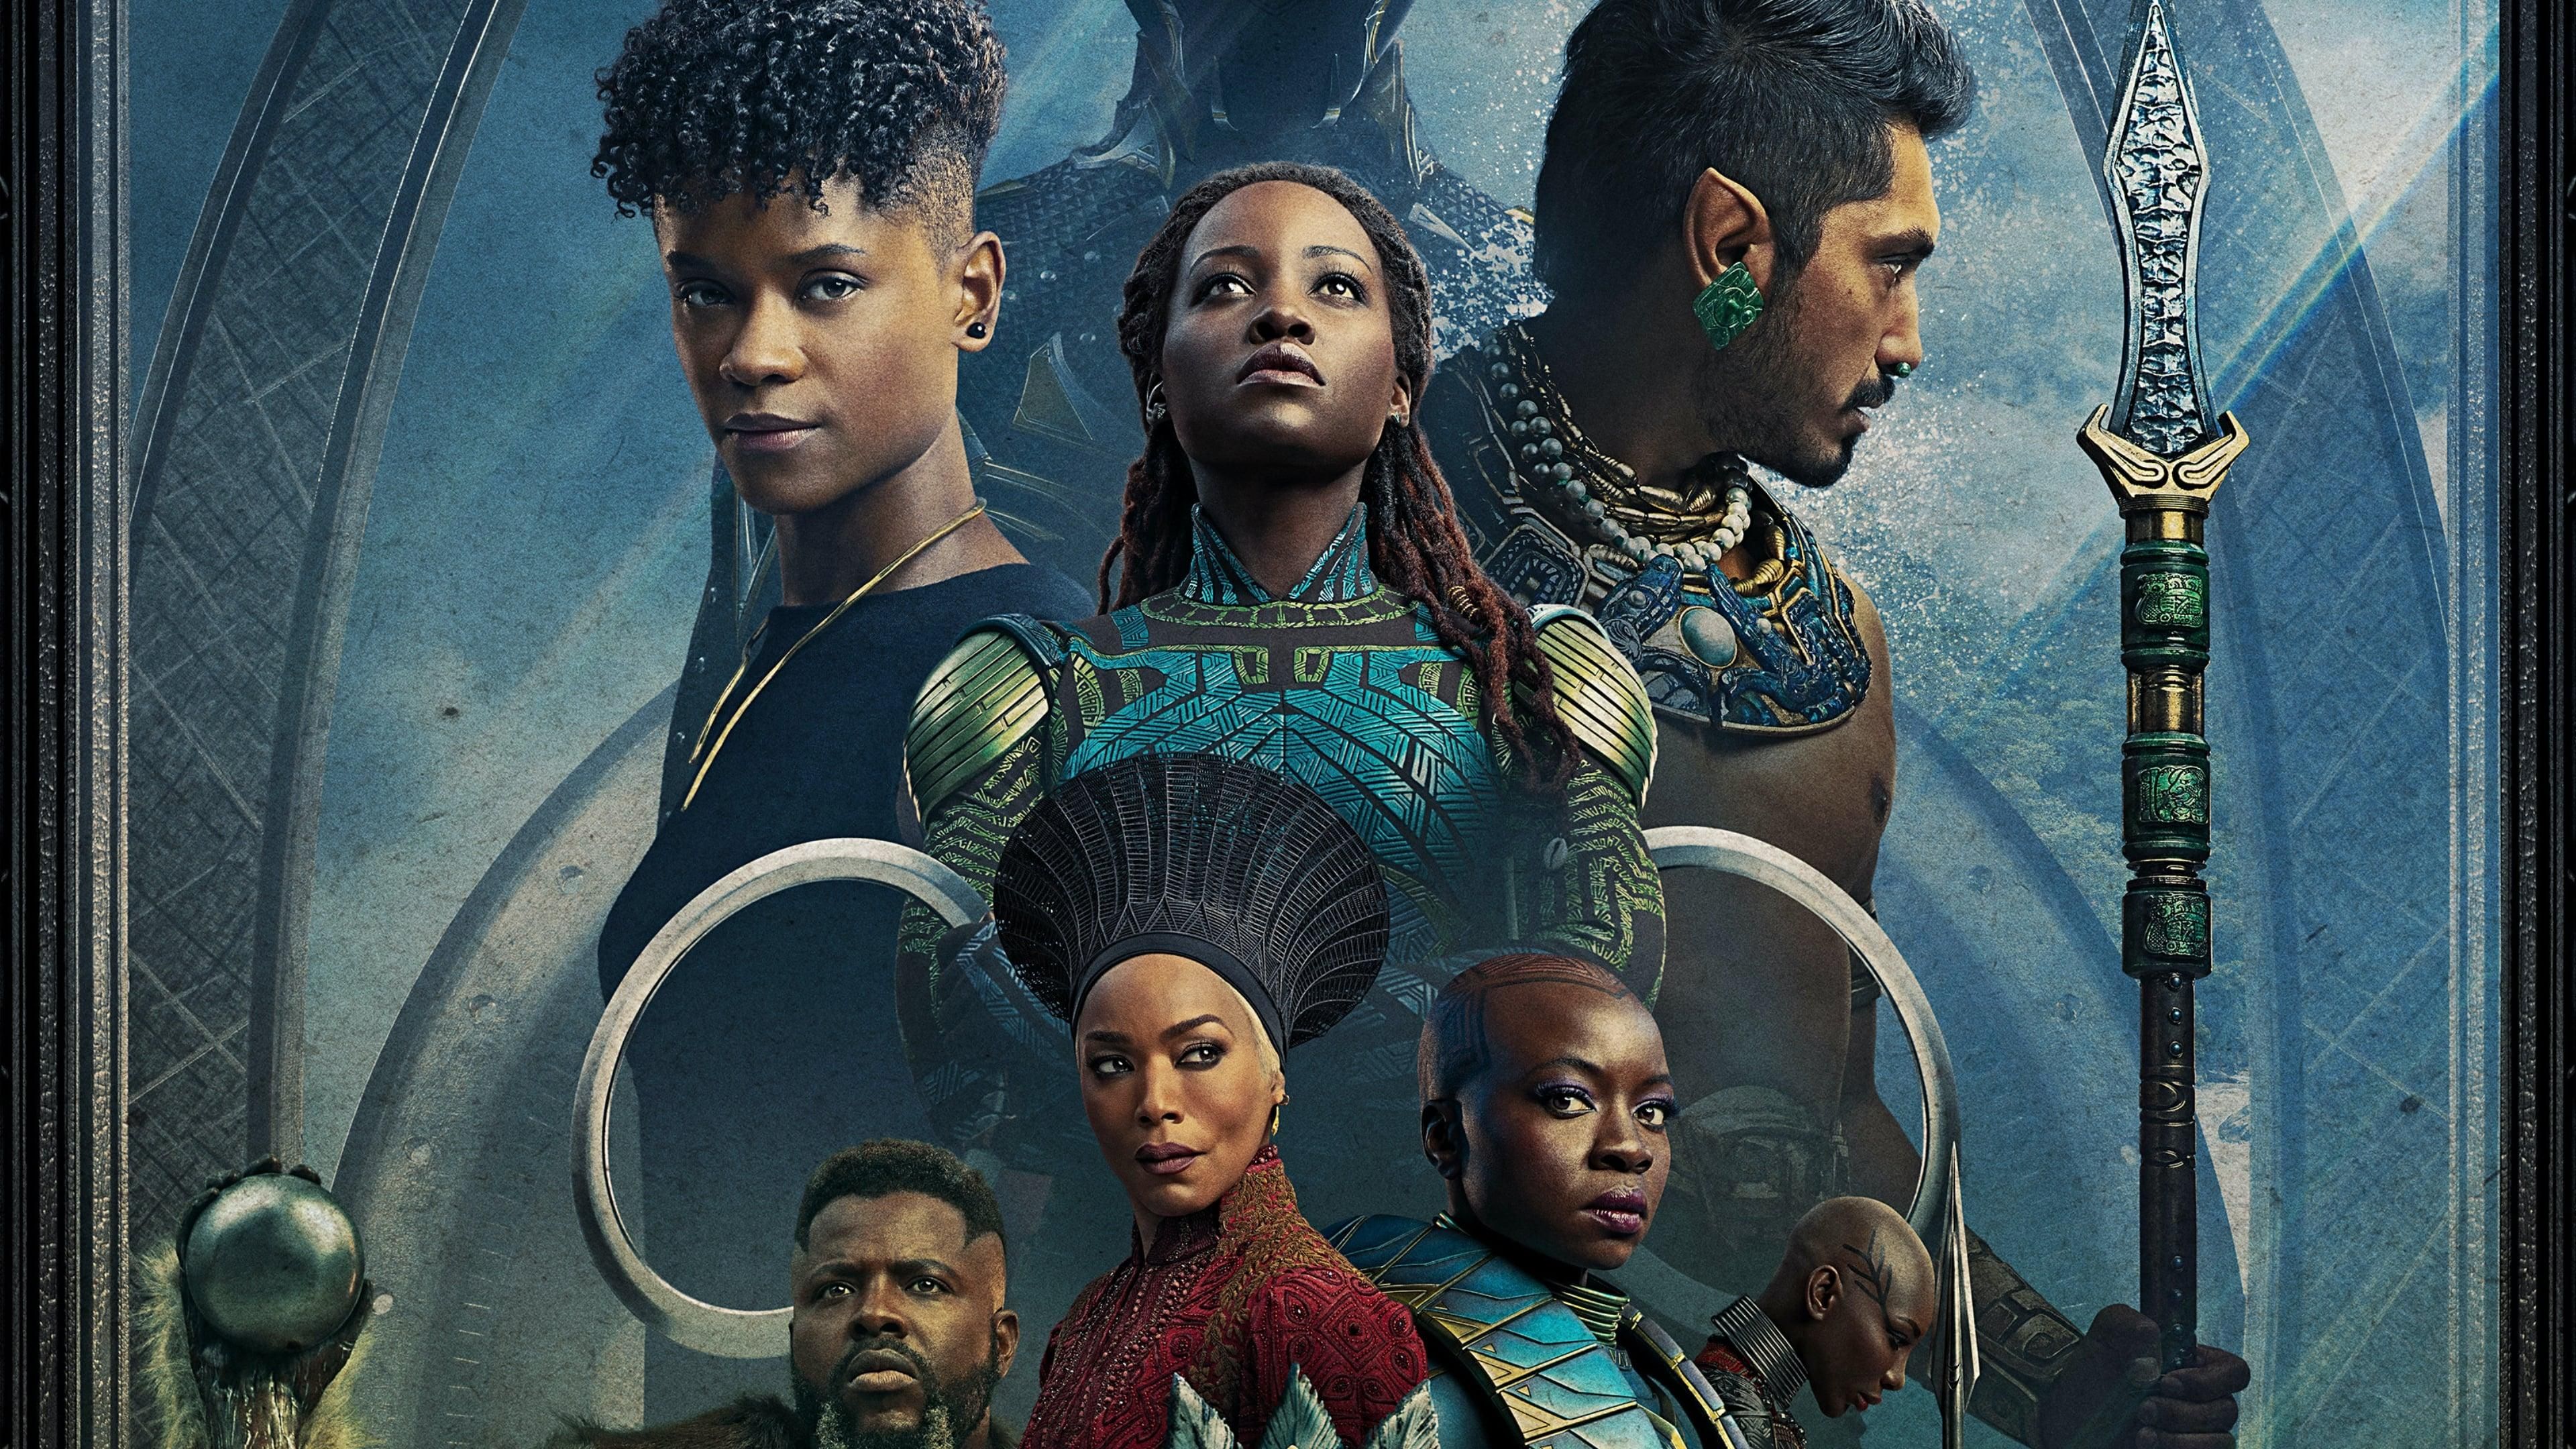 Black Panther: Wakanda Forever is not your typical Marvel movie